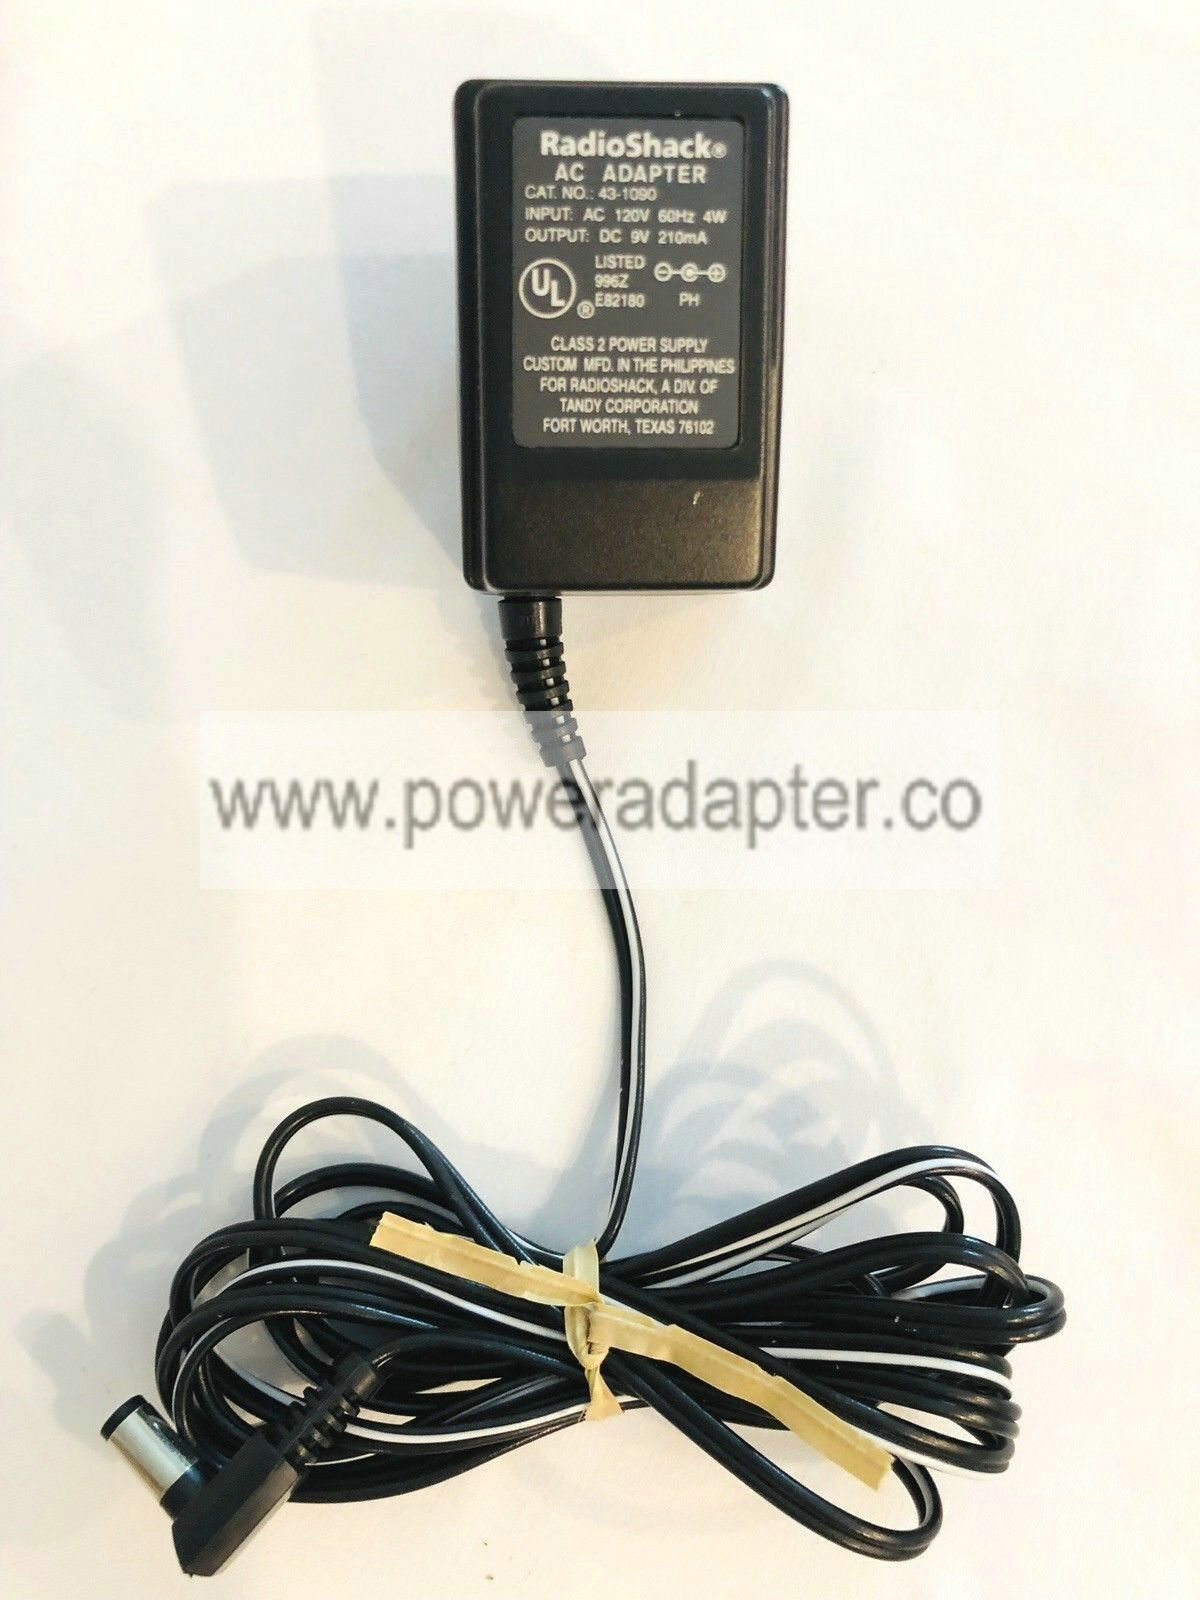 RadioShack 43-1090 AC DC Power Supply Adapter Charger Output 9V 210mA RadioShack Ac Adapter 43-1090 Class 2 Power Sup - Click Image to Close